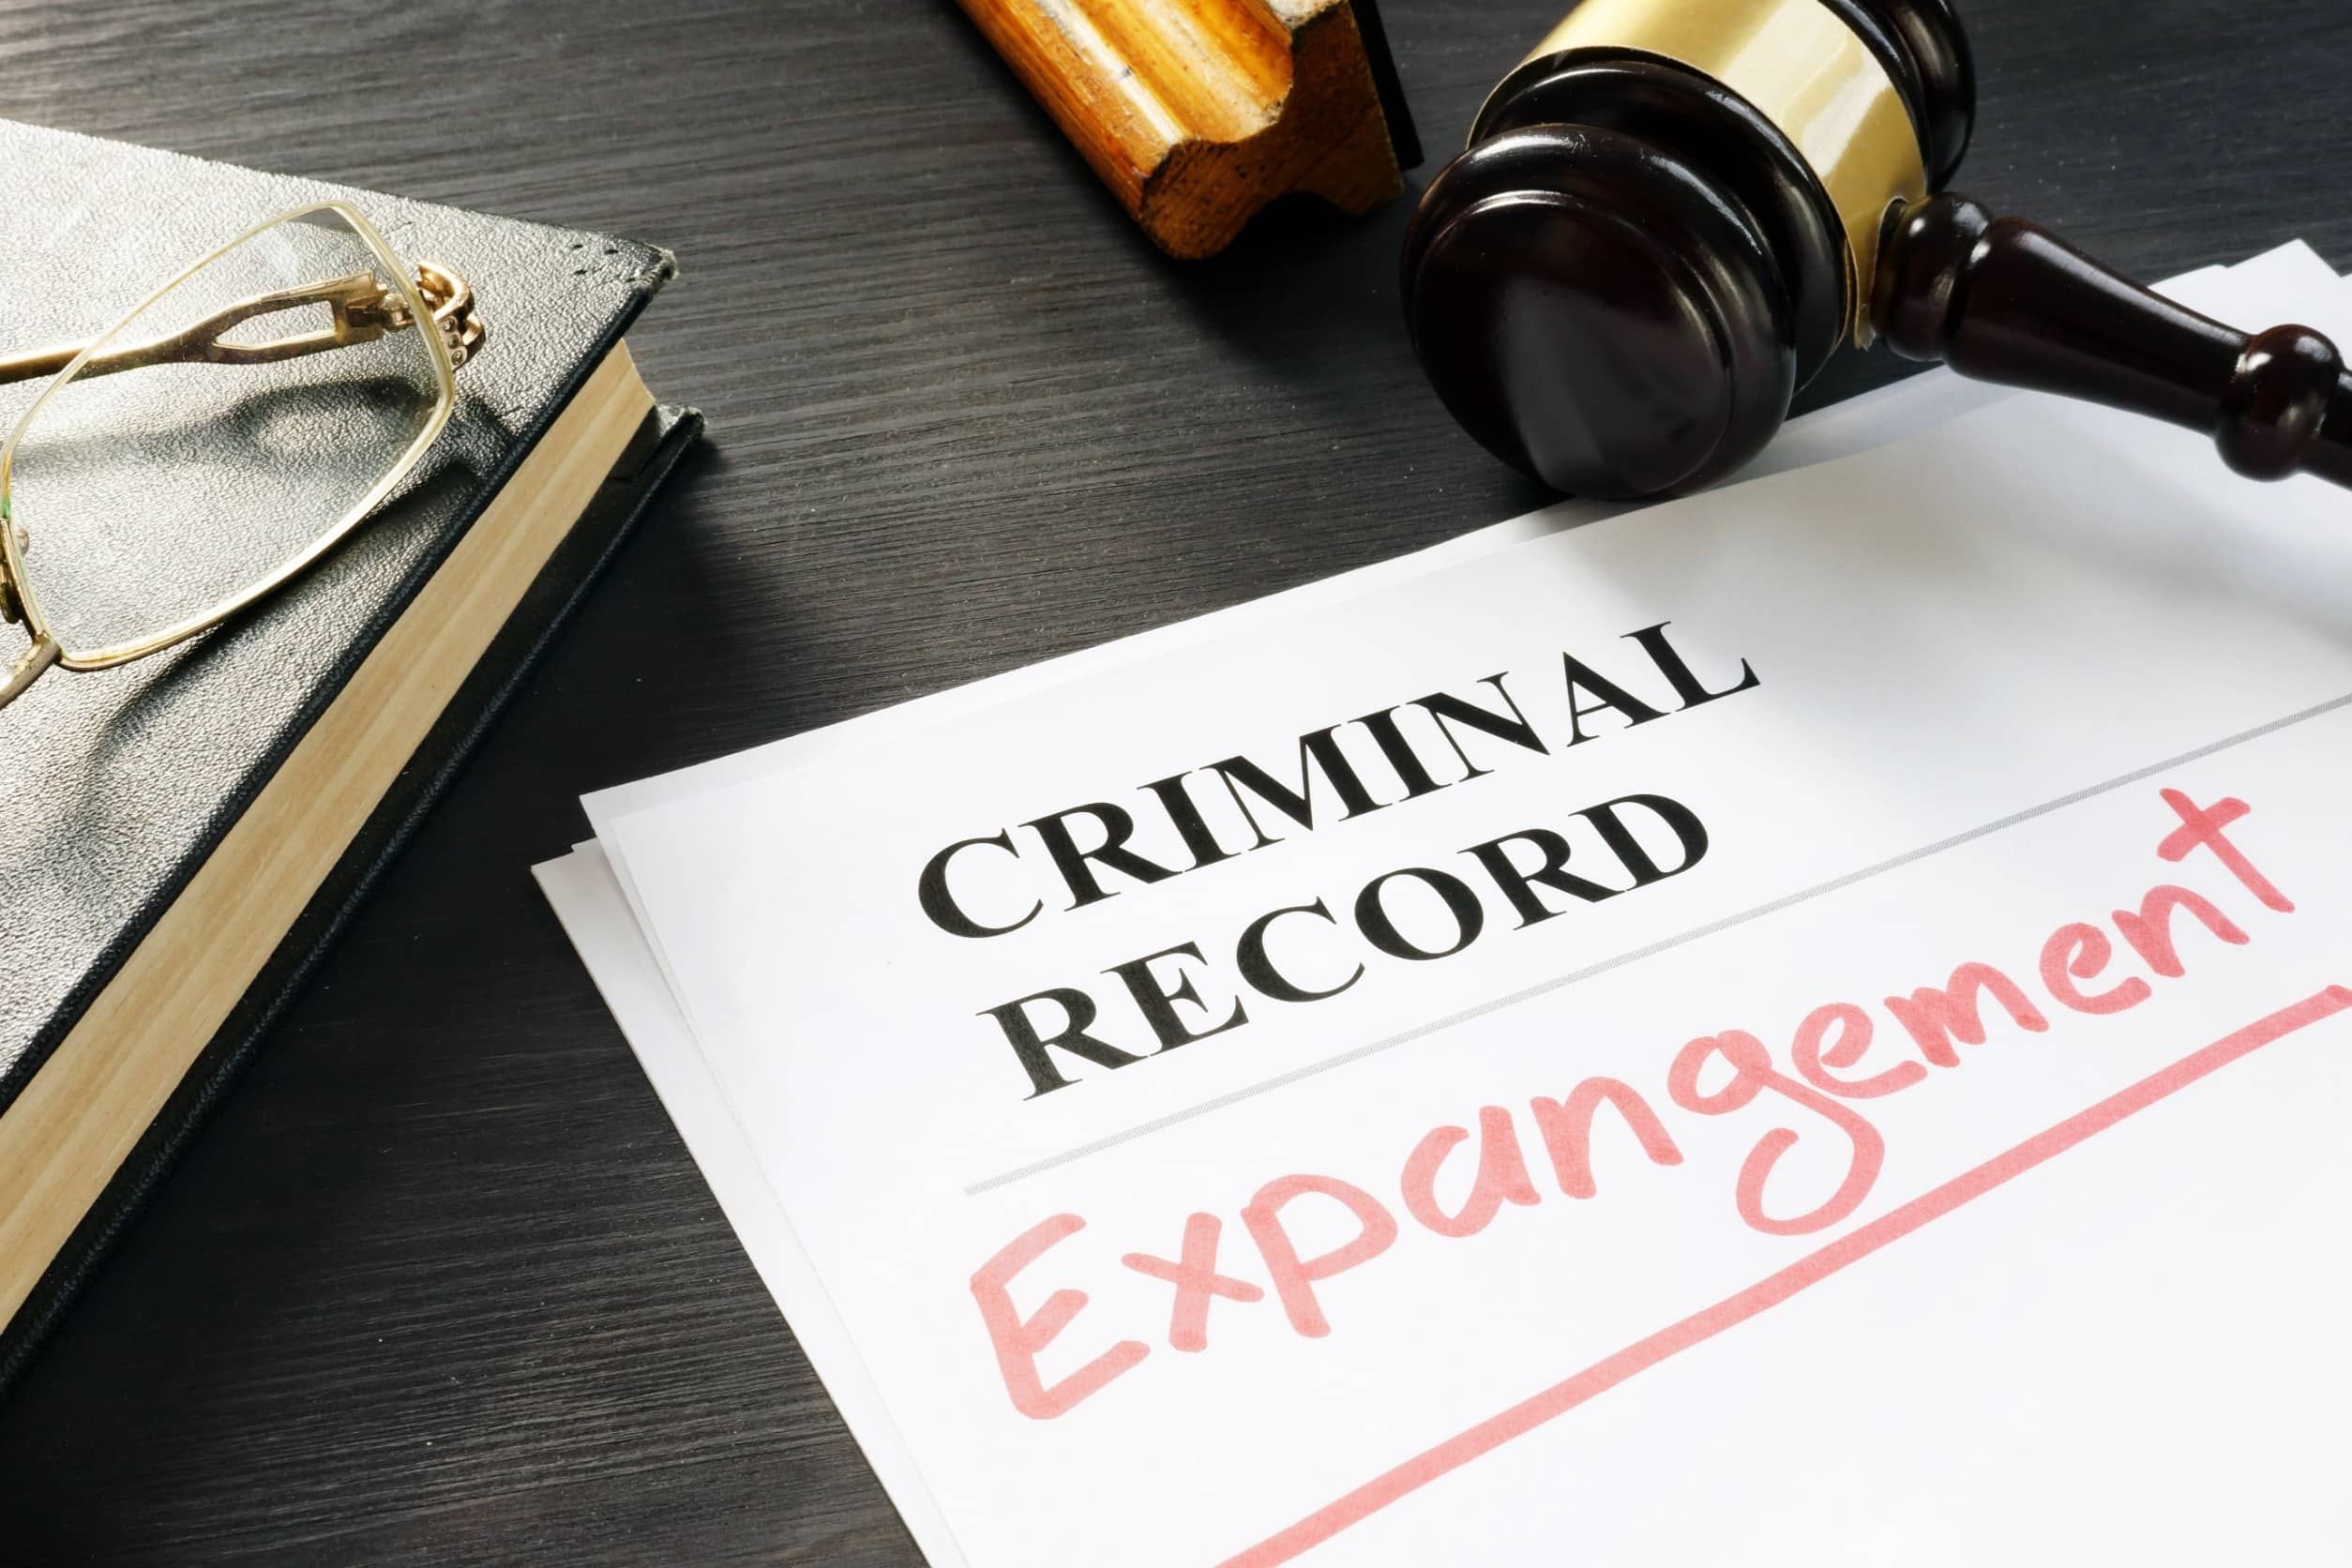 Benefits of Expunging a Juvenile Record